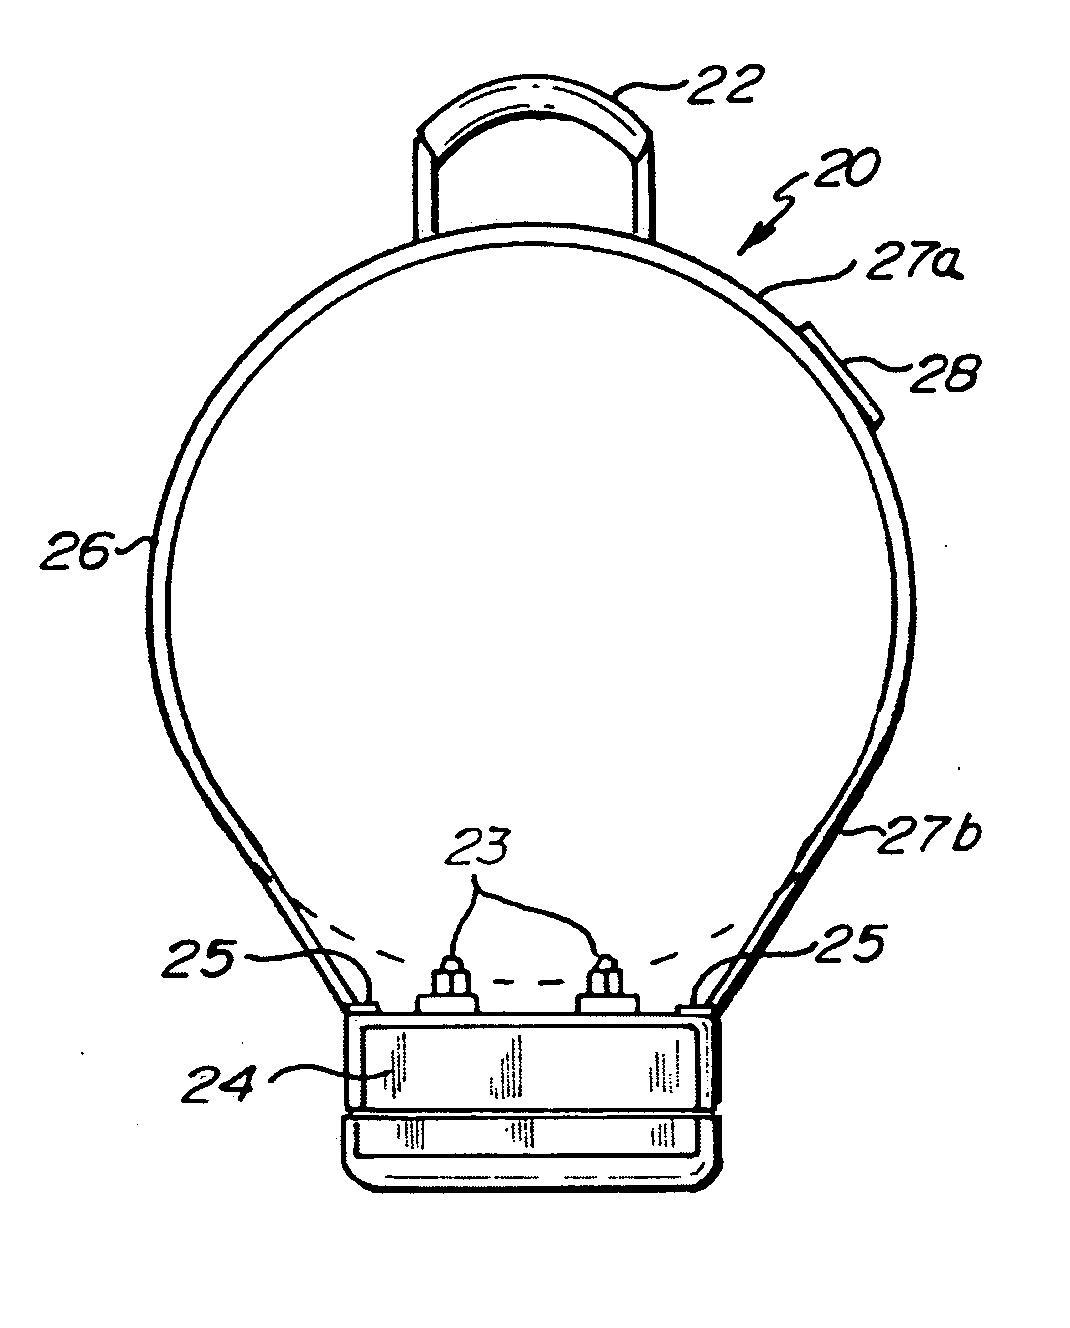 GPS pet containment system and method